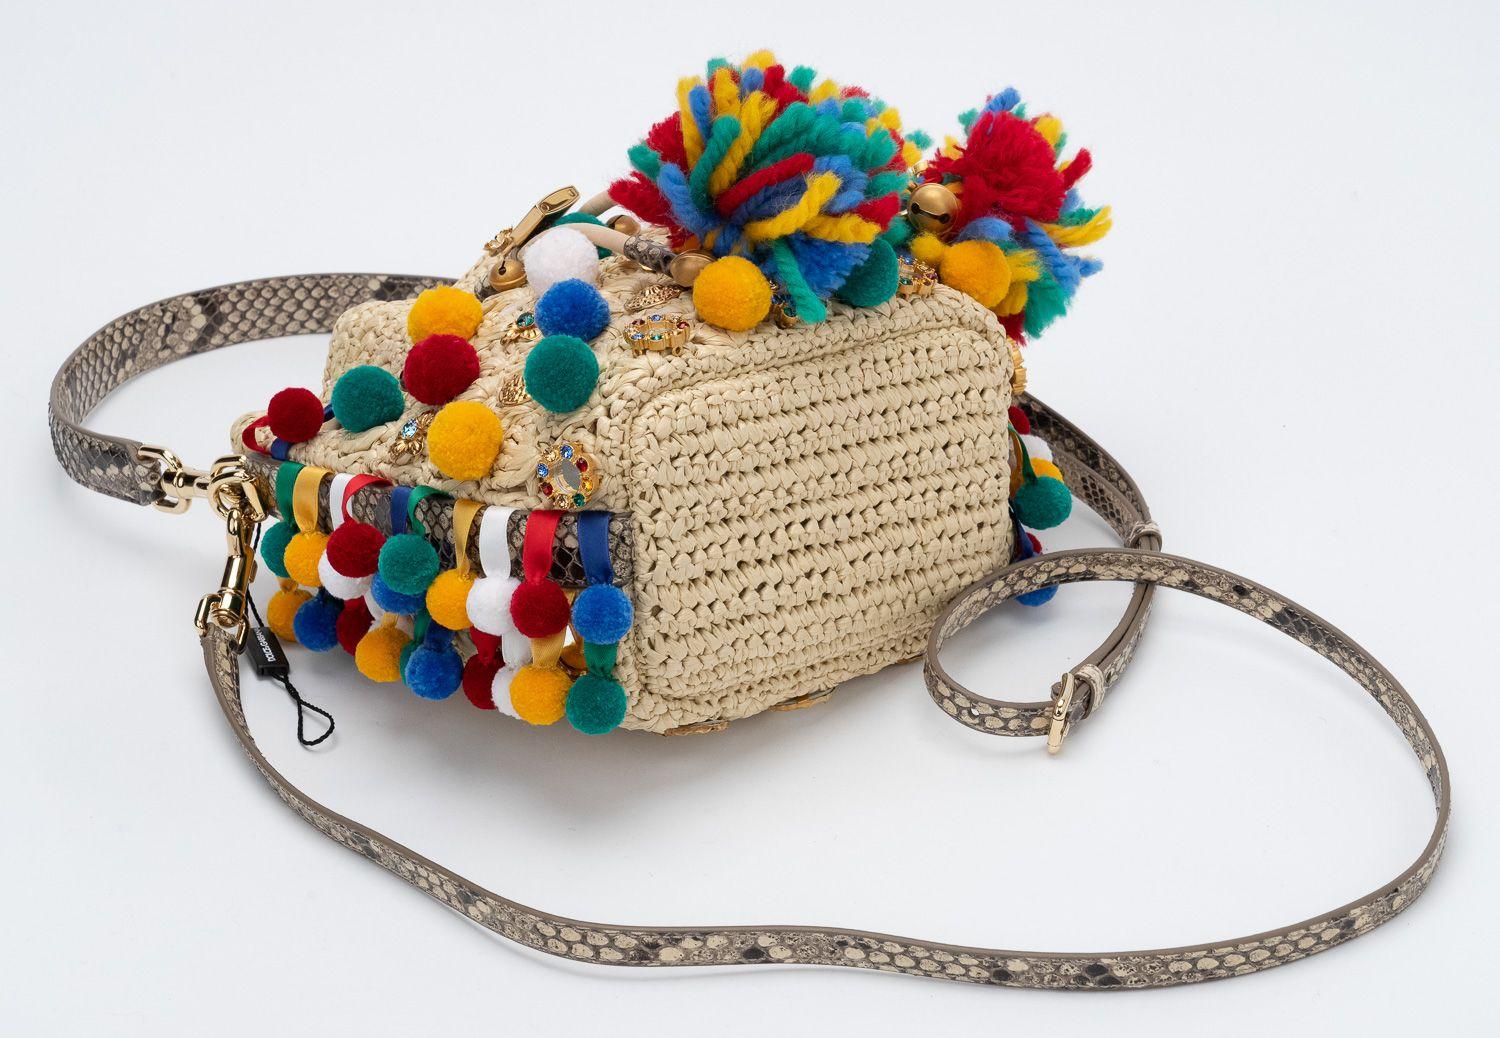 Dolce New Raffia Pompoms Python Bag In New Condition For Sale In West Hollywood, CA